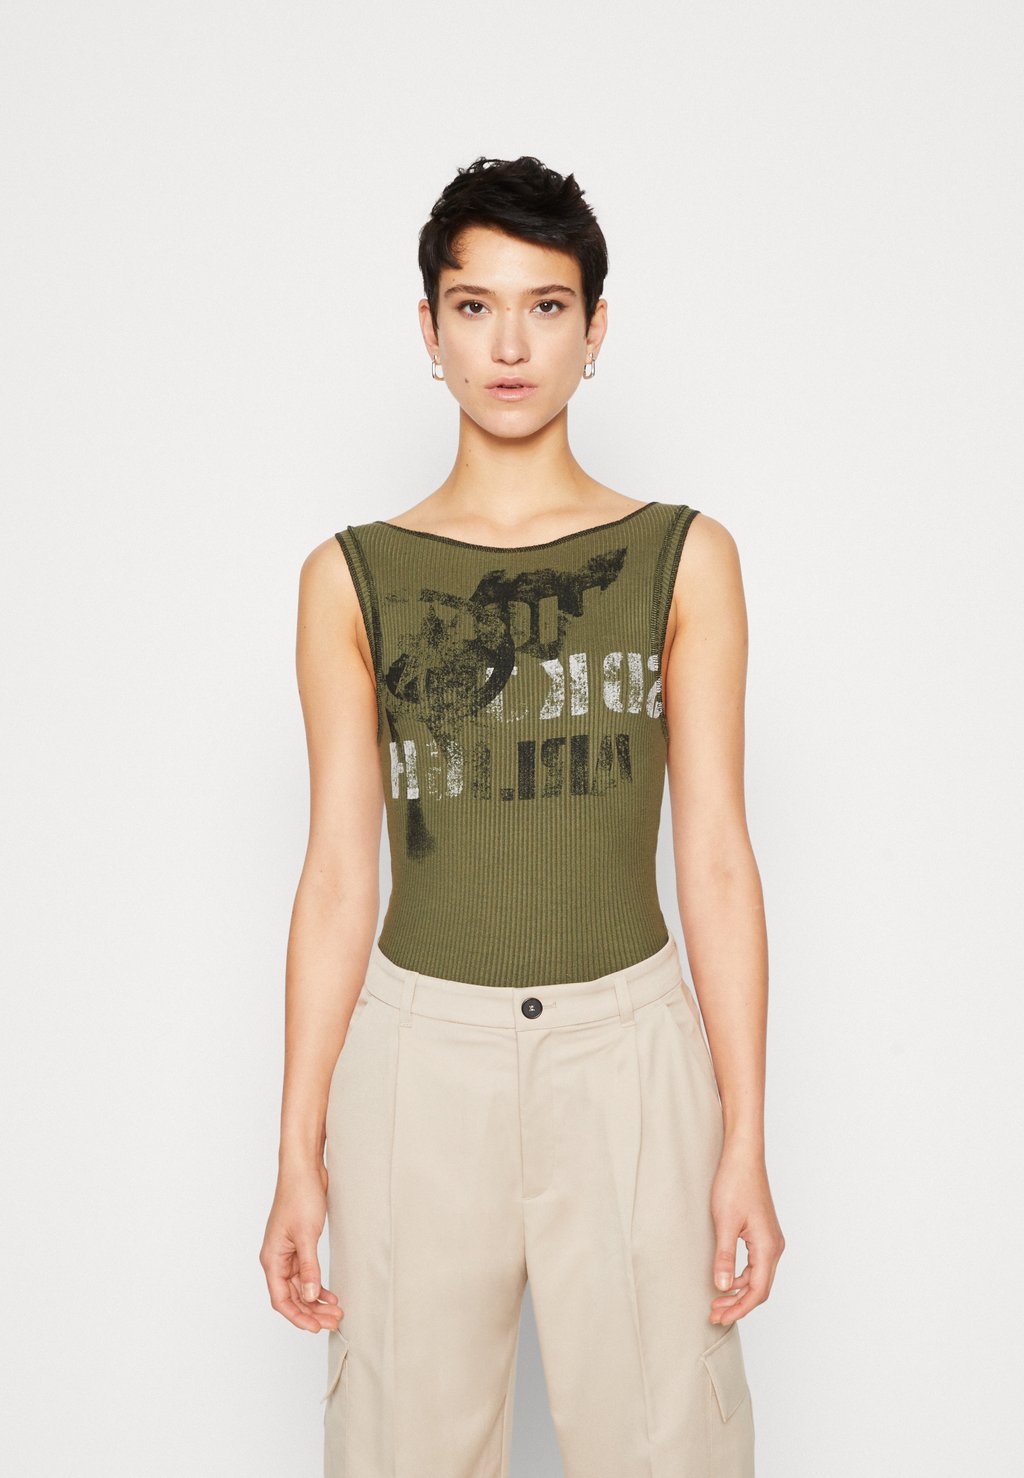 Топ Stencil Tank BDG Urban Outfitters, хаки